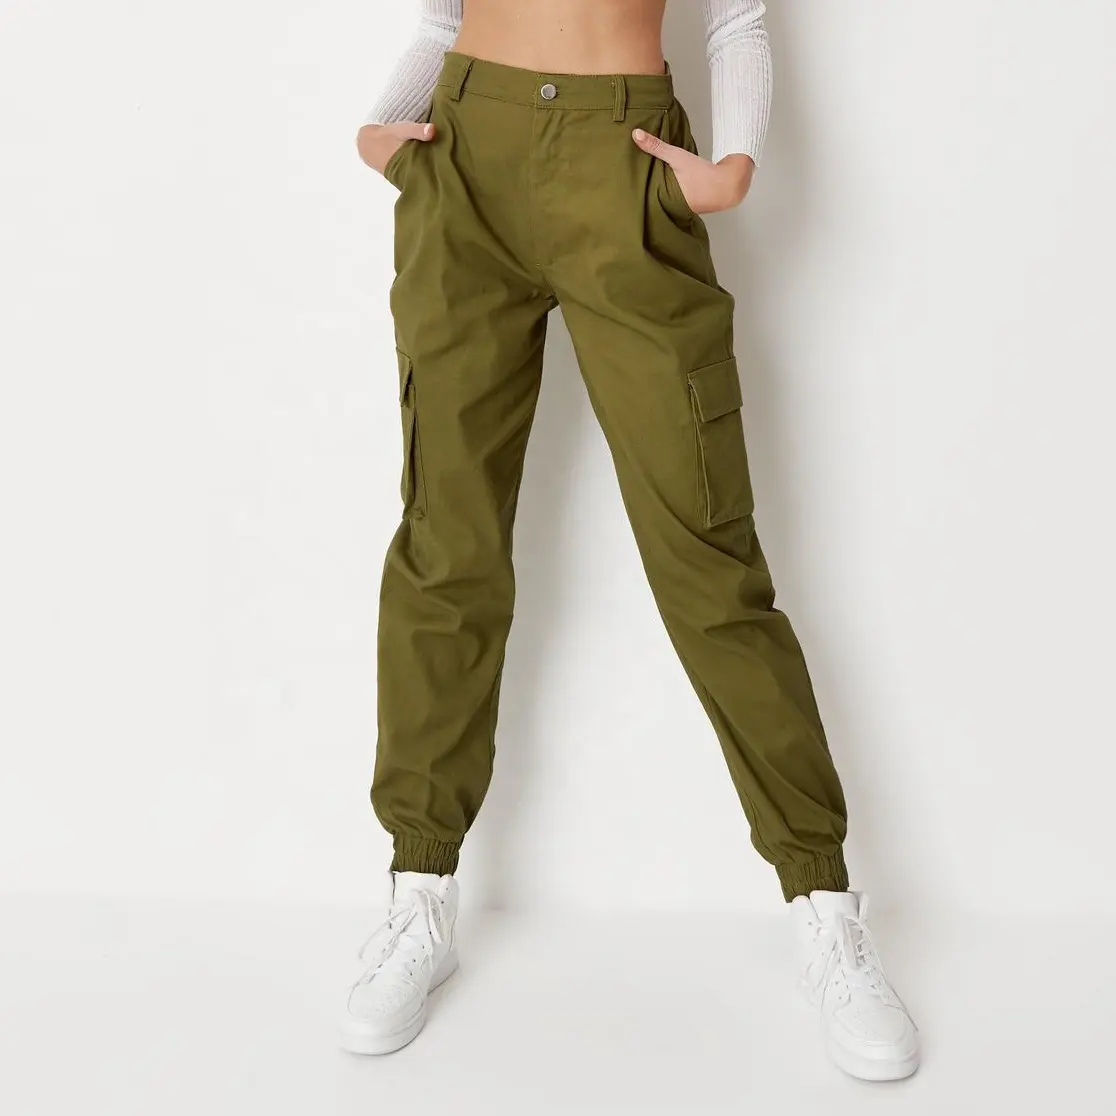 Cool Girl Wear Women Green Breasted Cargo Pants With Pockets Straight Leg Overall plus size Pants